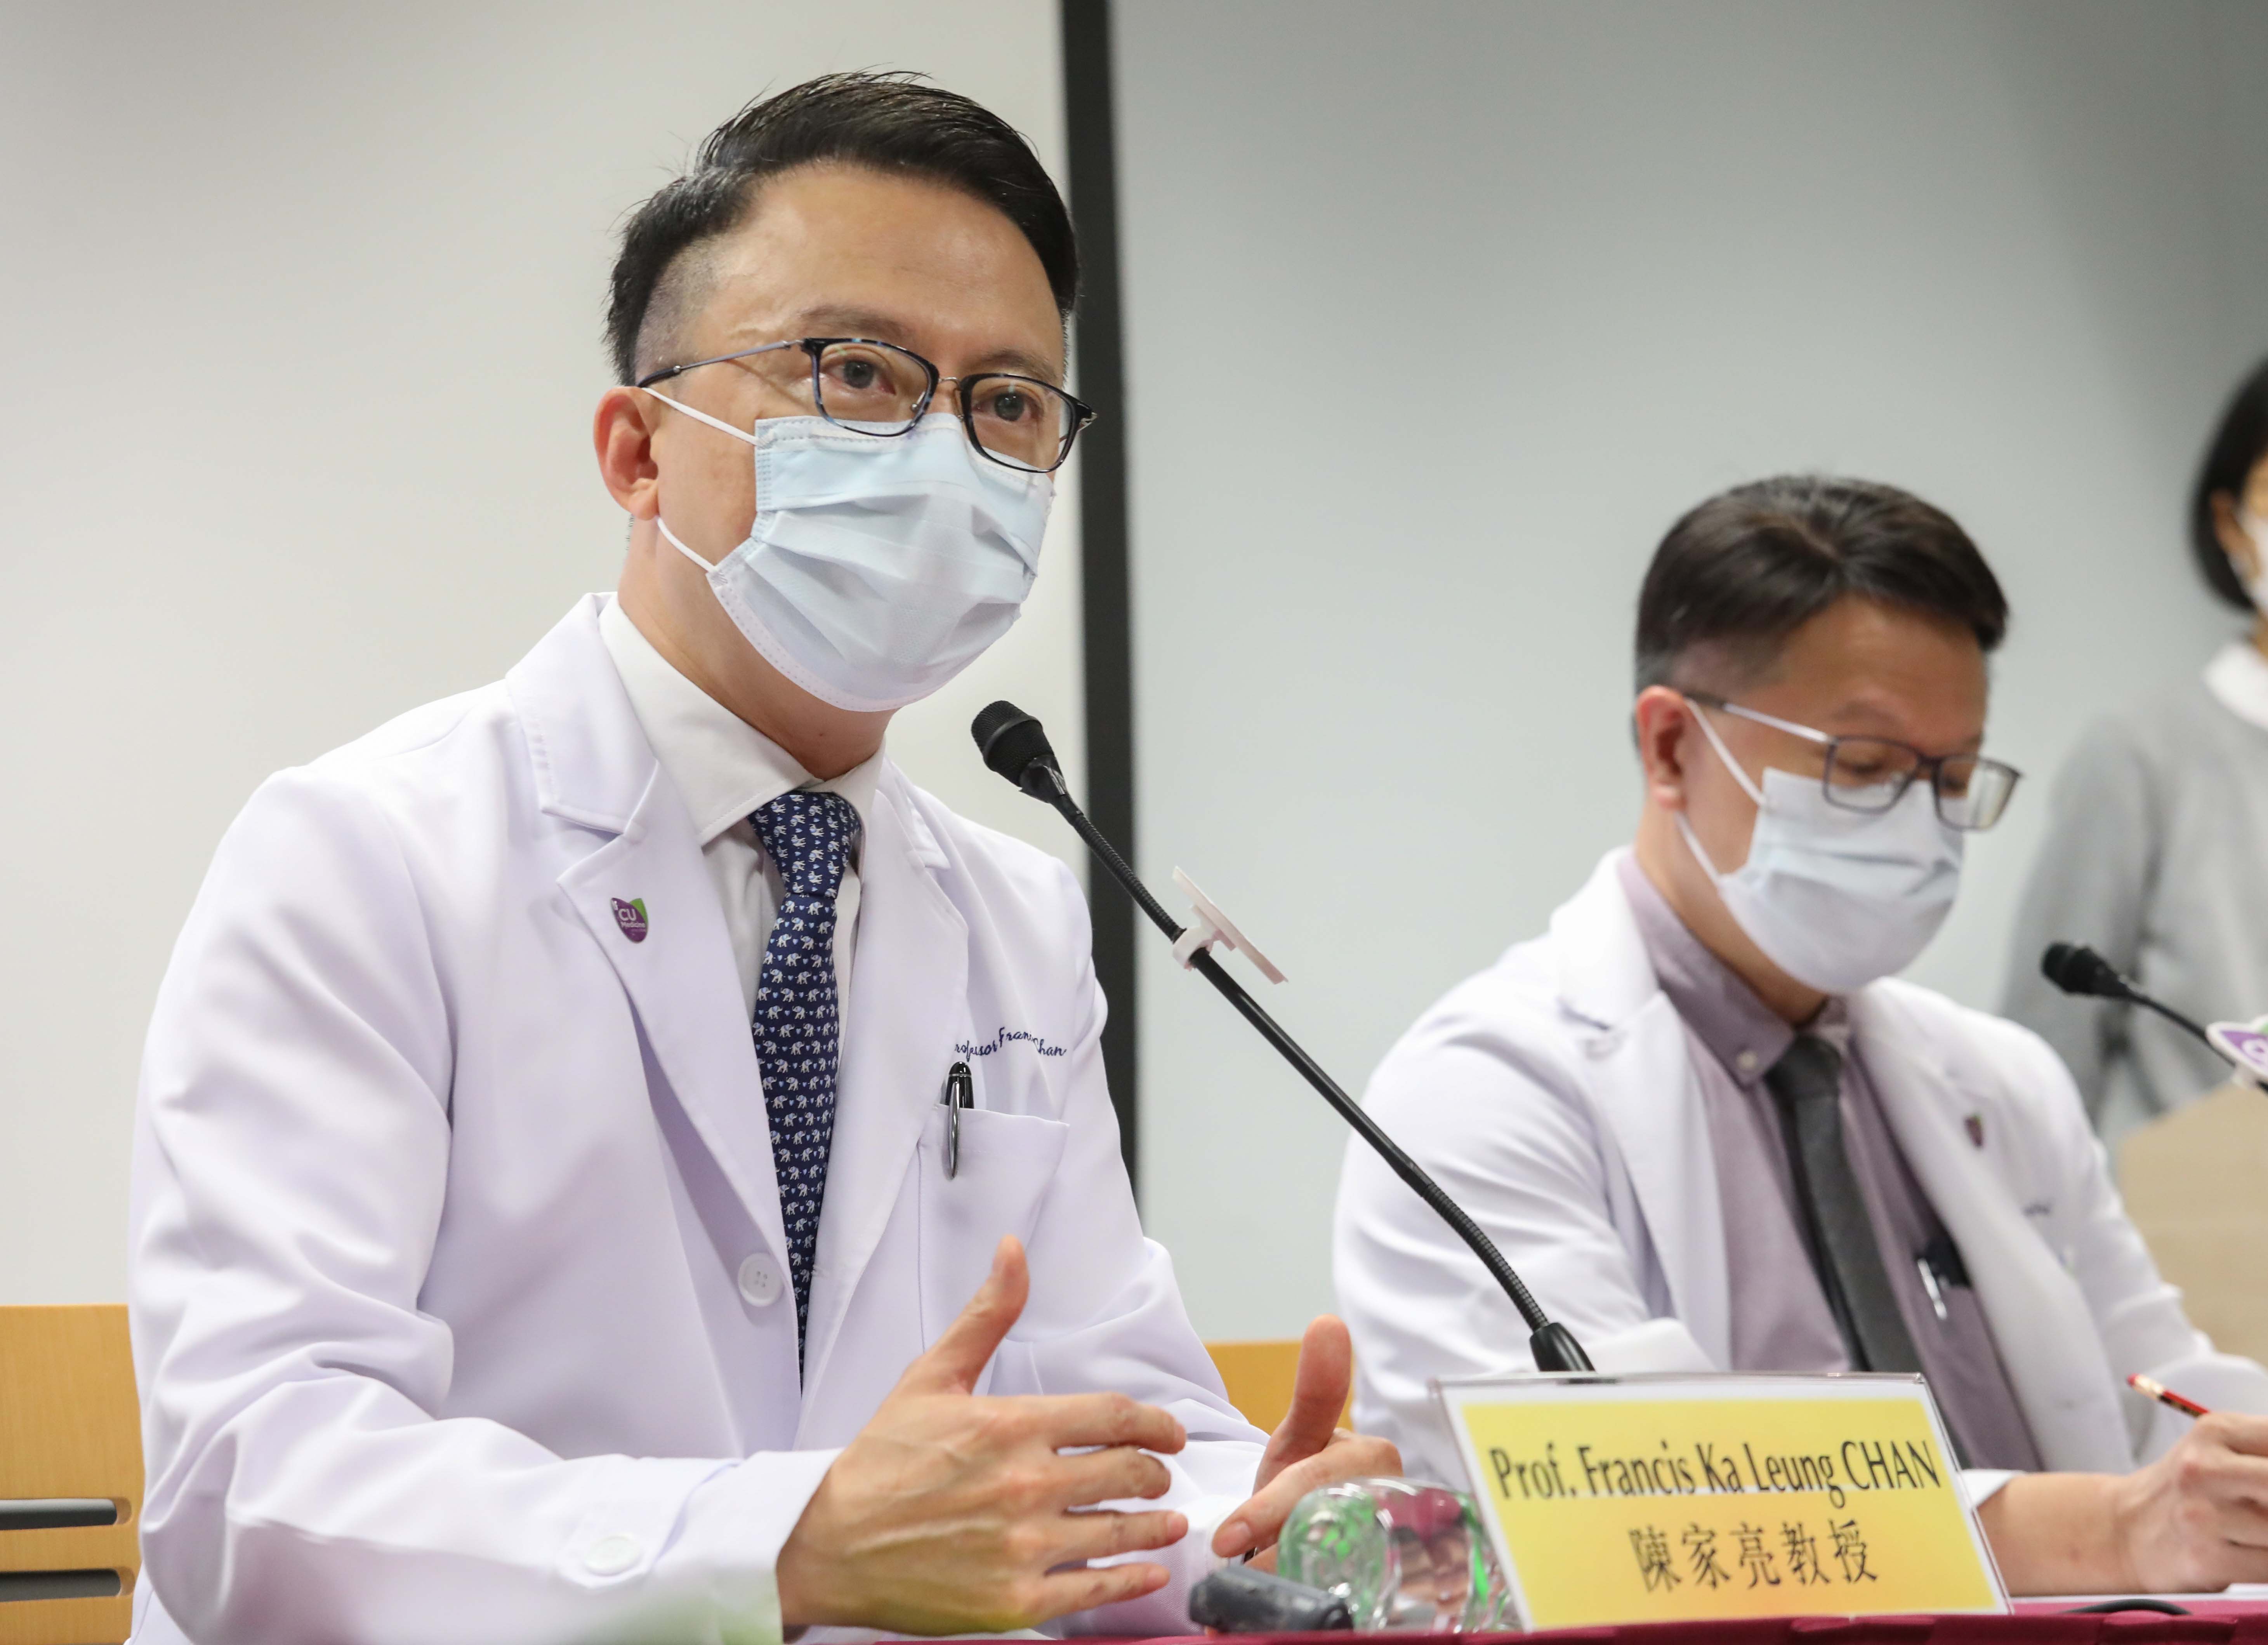 Prof. Francis CHAN reminds the public that virus shedding in stool may impose health hazard to others. Caretakers and food handlers should be particularly vigilant about their hand hygiene.